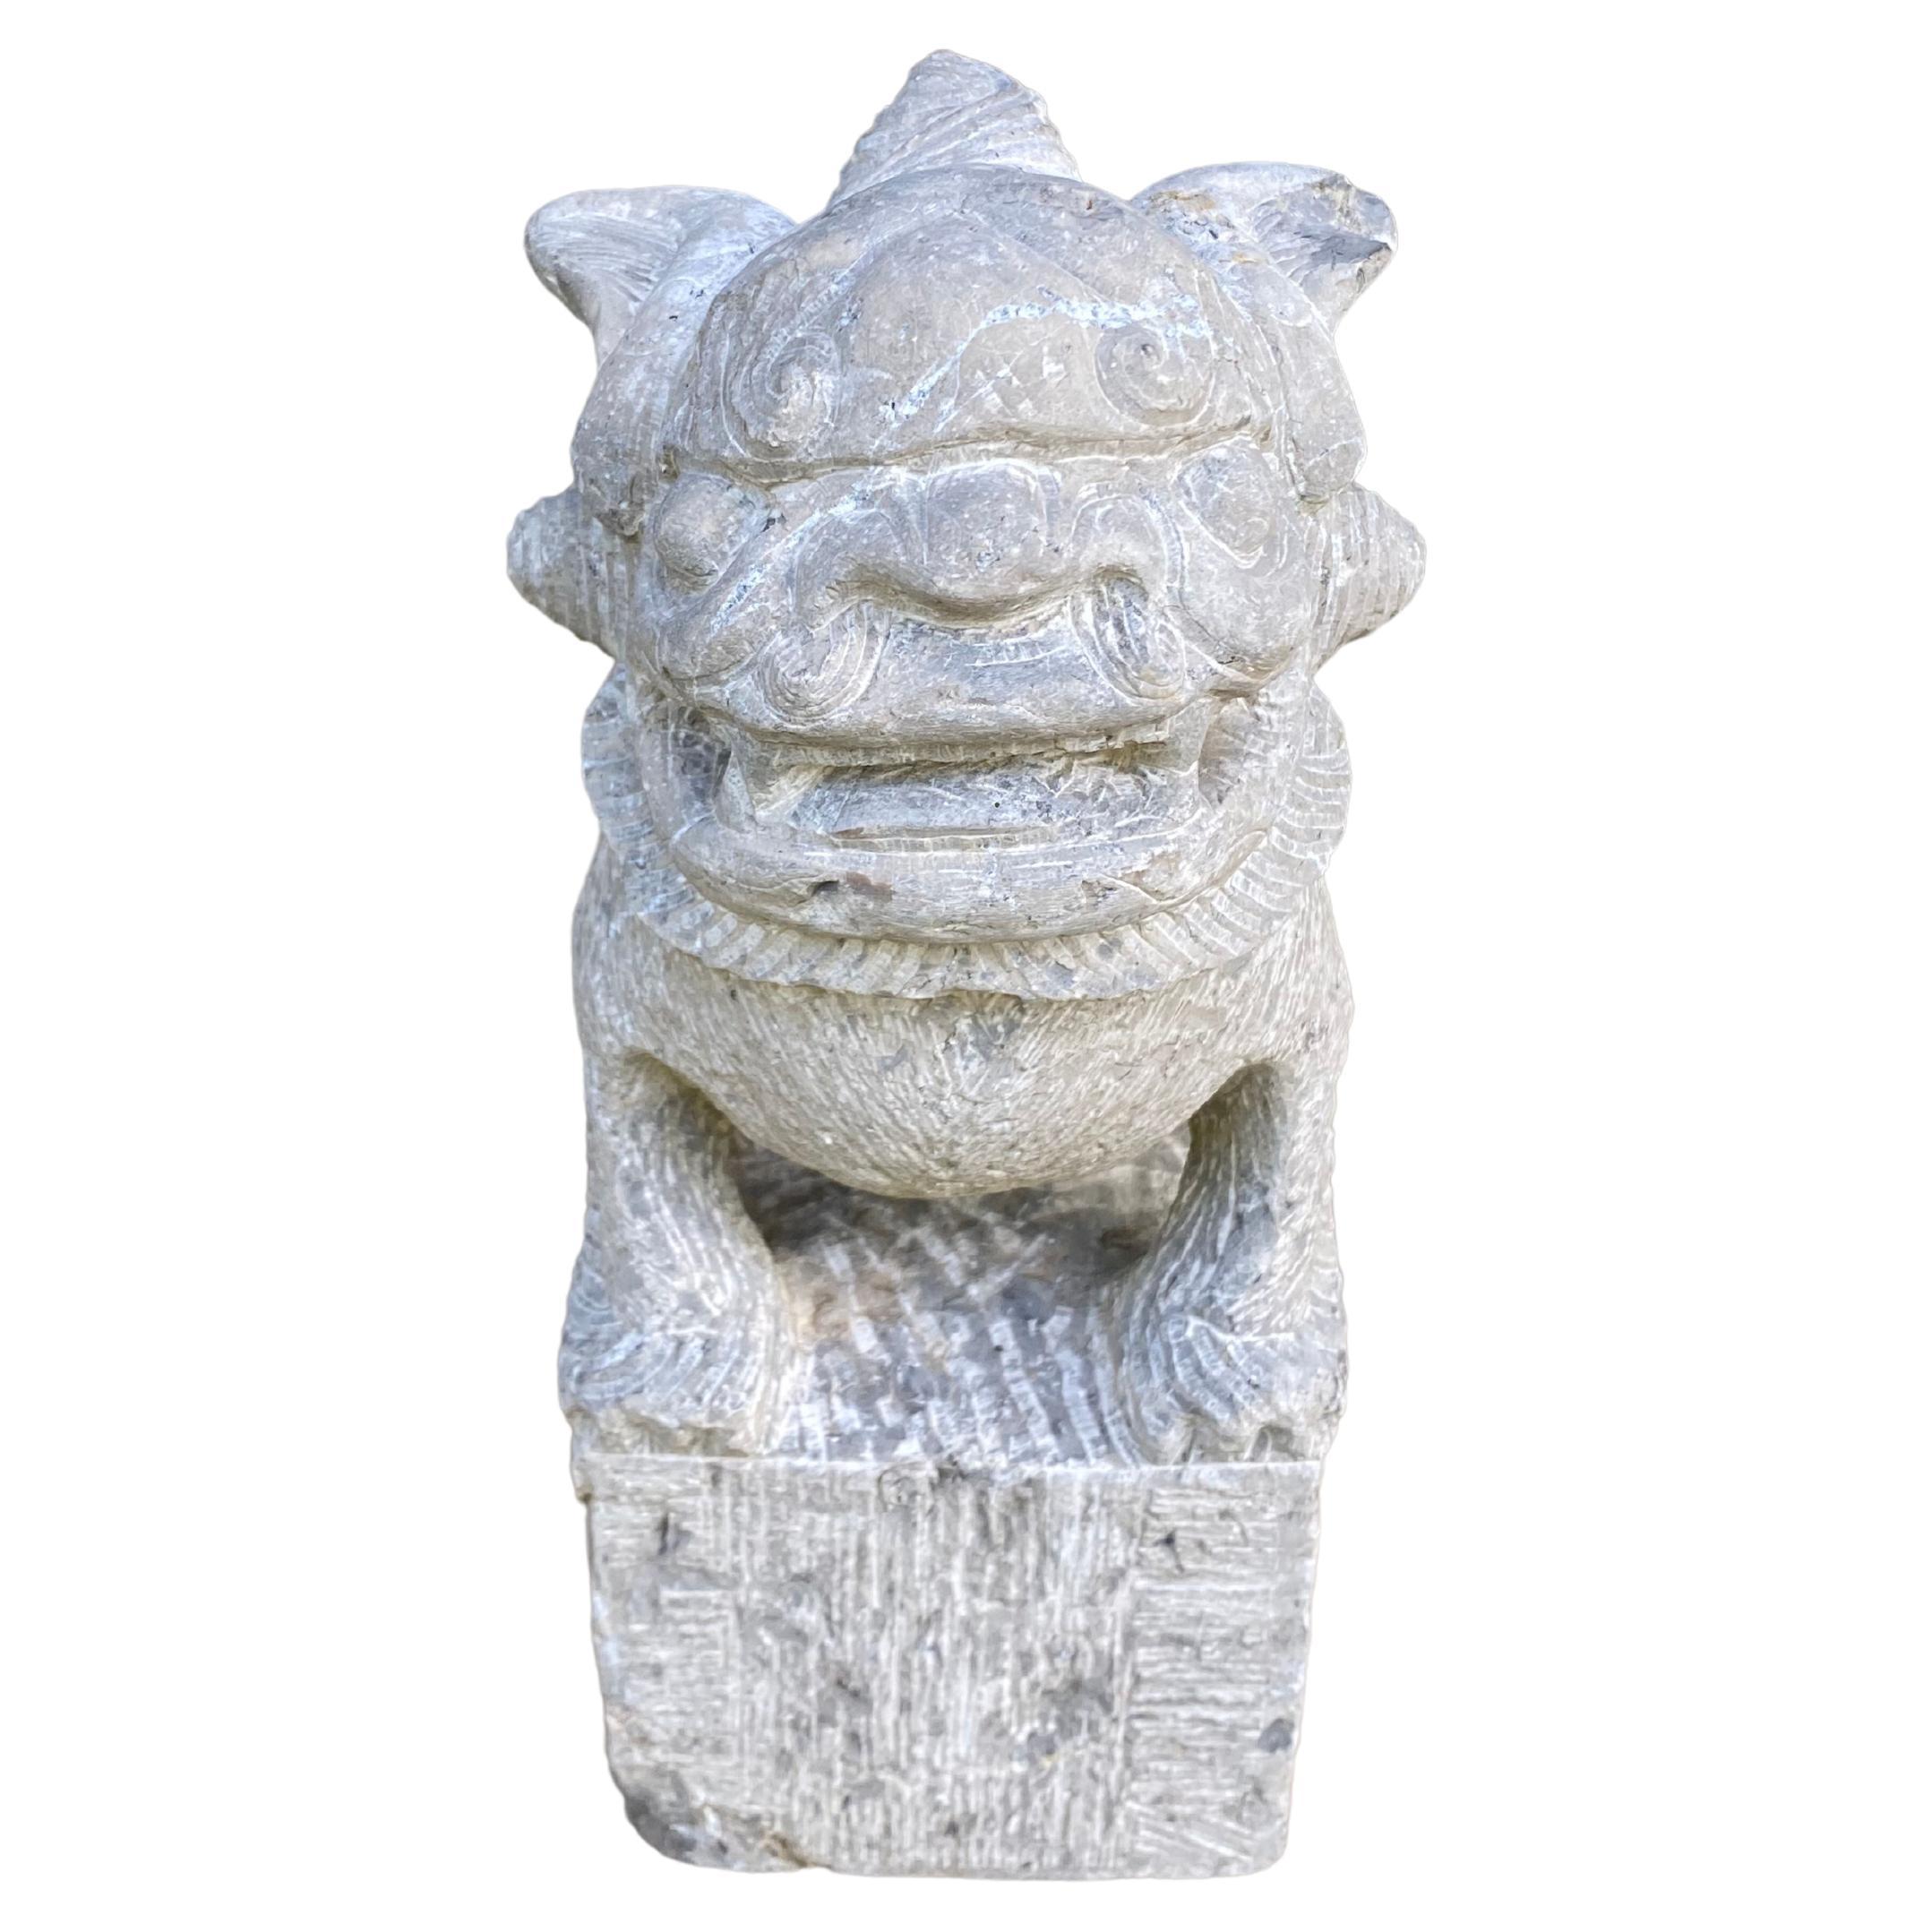 This limestone carving depicts a Fu Dog Guardian figure and was carved from a solid block. Sculptures such as these were used to protect ones home from bad spirits or bad luck. They were often placed in the garden or entrance. There are carved